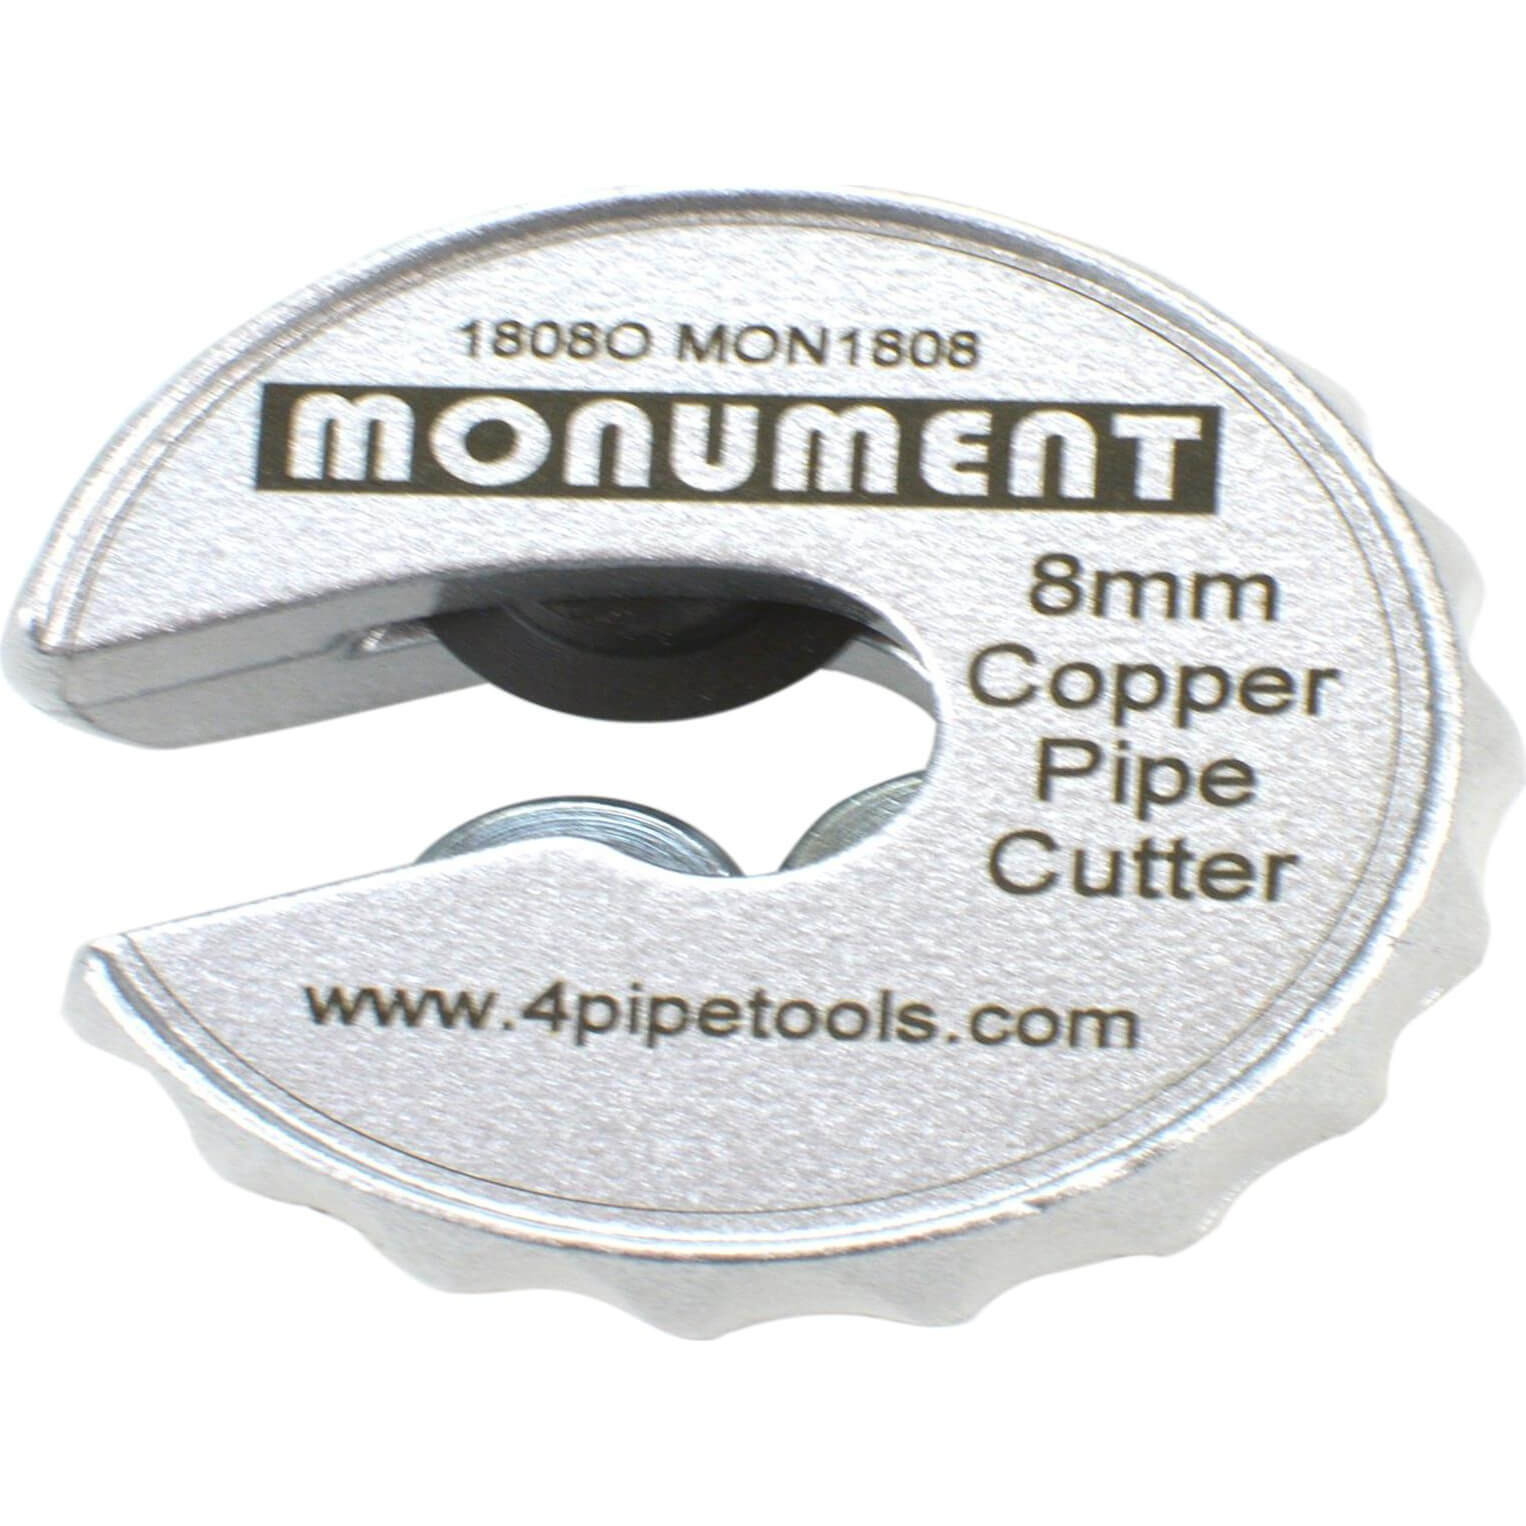 Photo of Monument Trade Copper Pipe Cutter 8mm